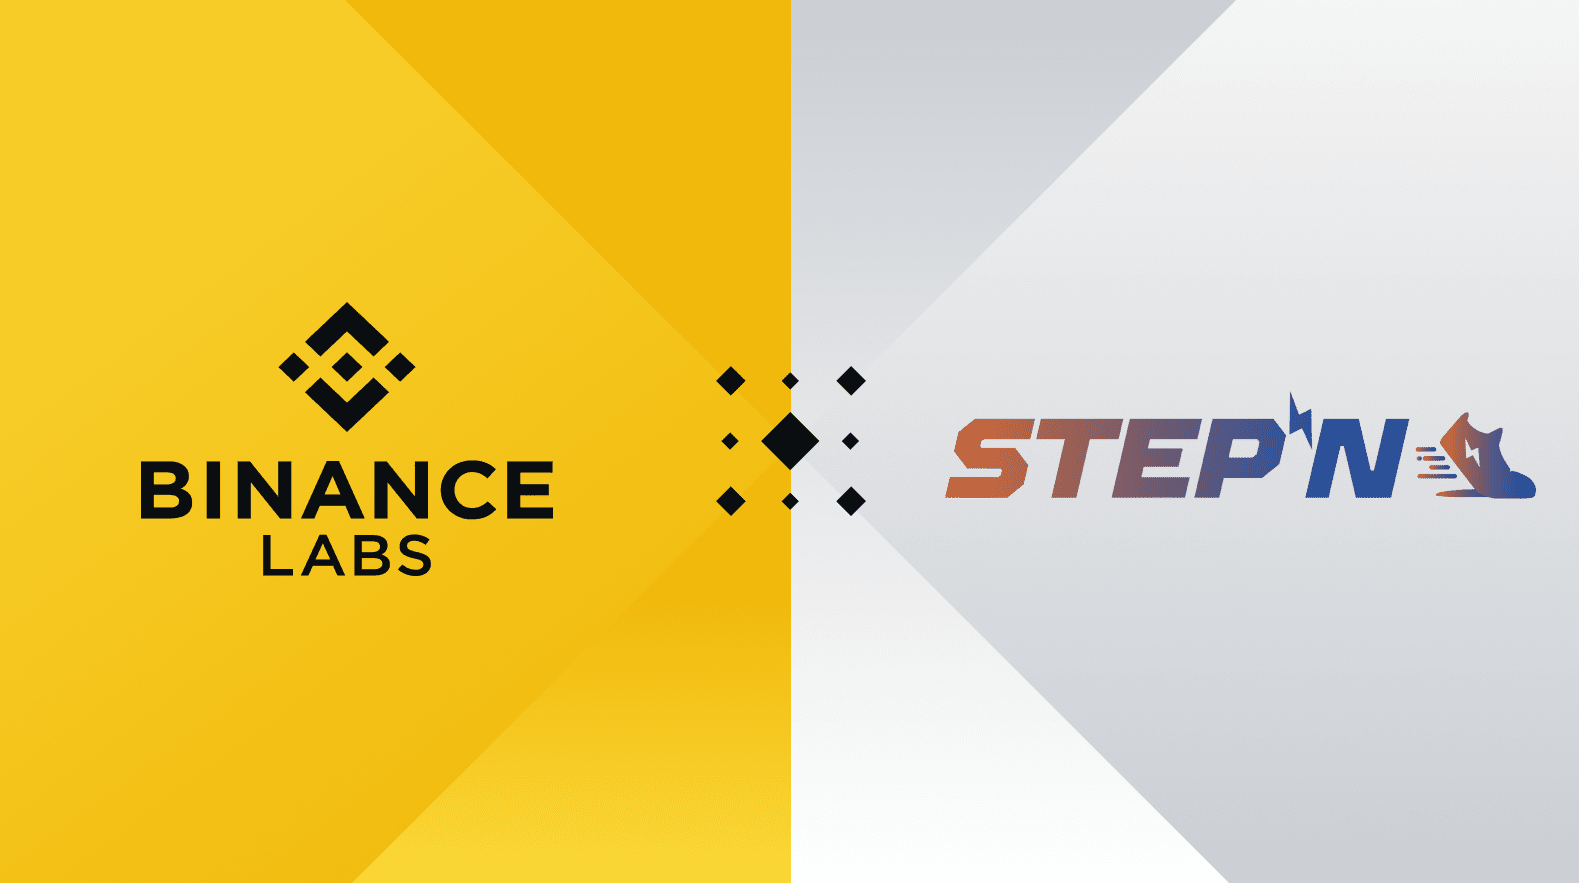 Binance Labs Invests in STEPN by FindSatoshi Lab On April 6th, 2022